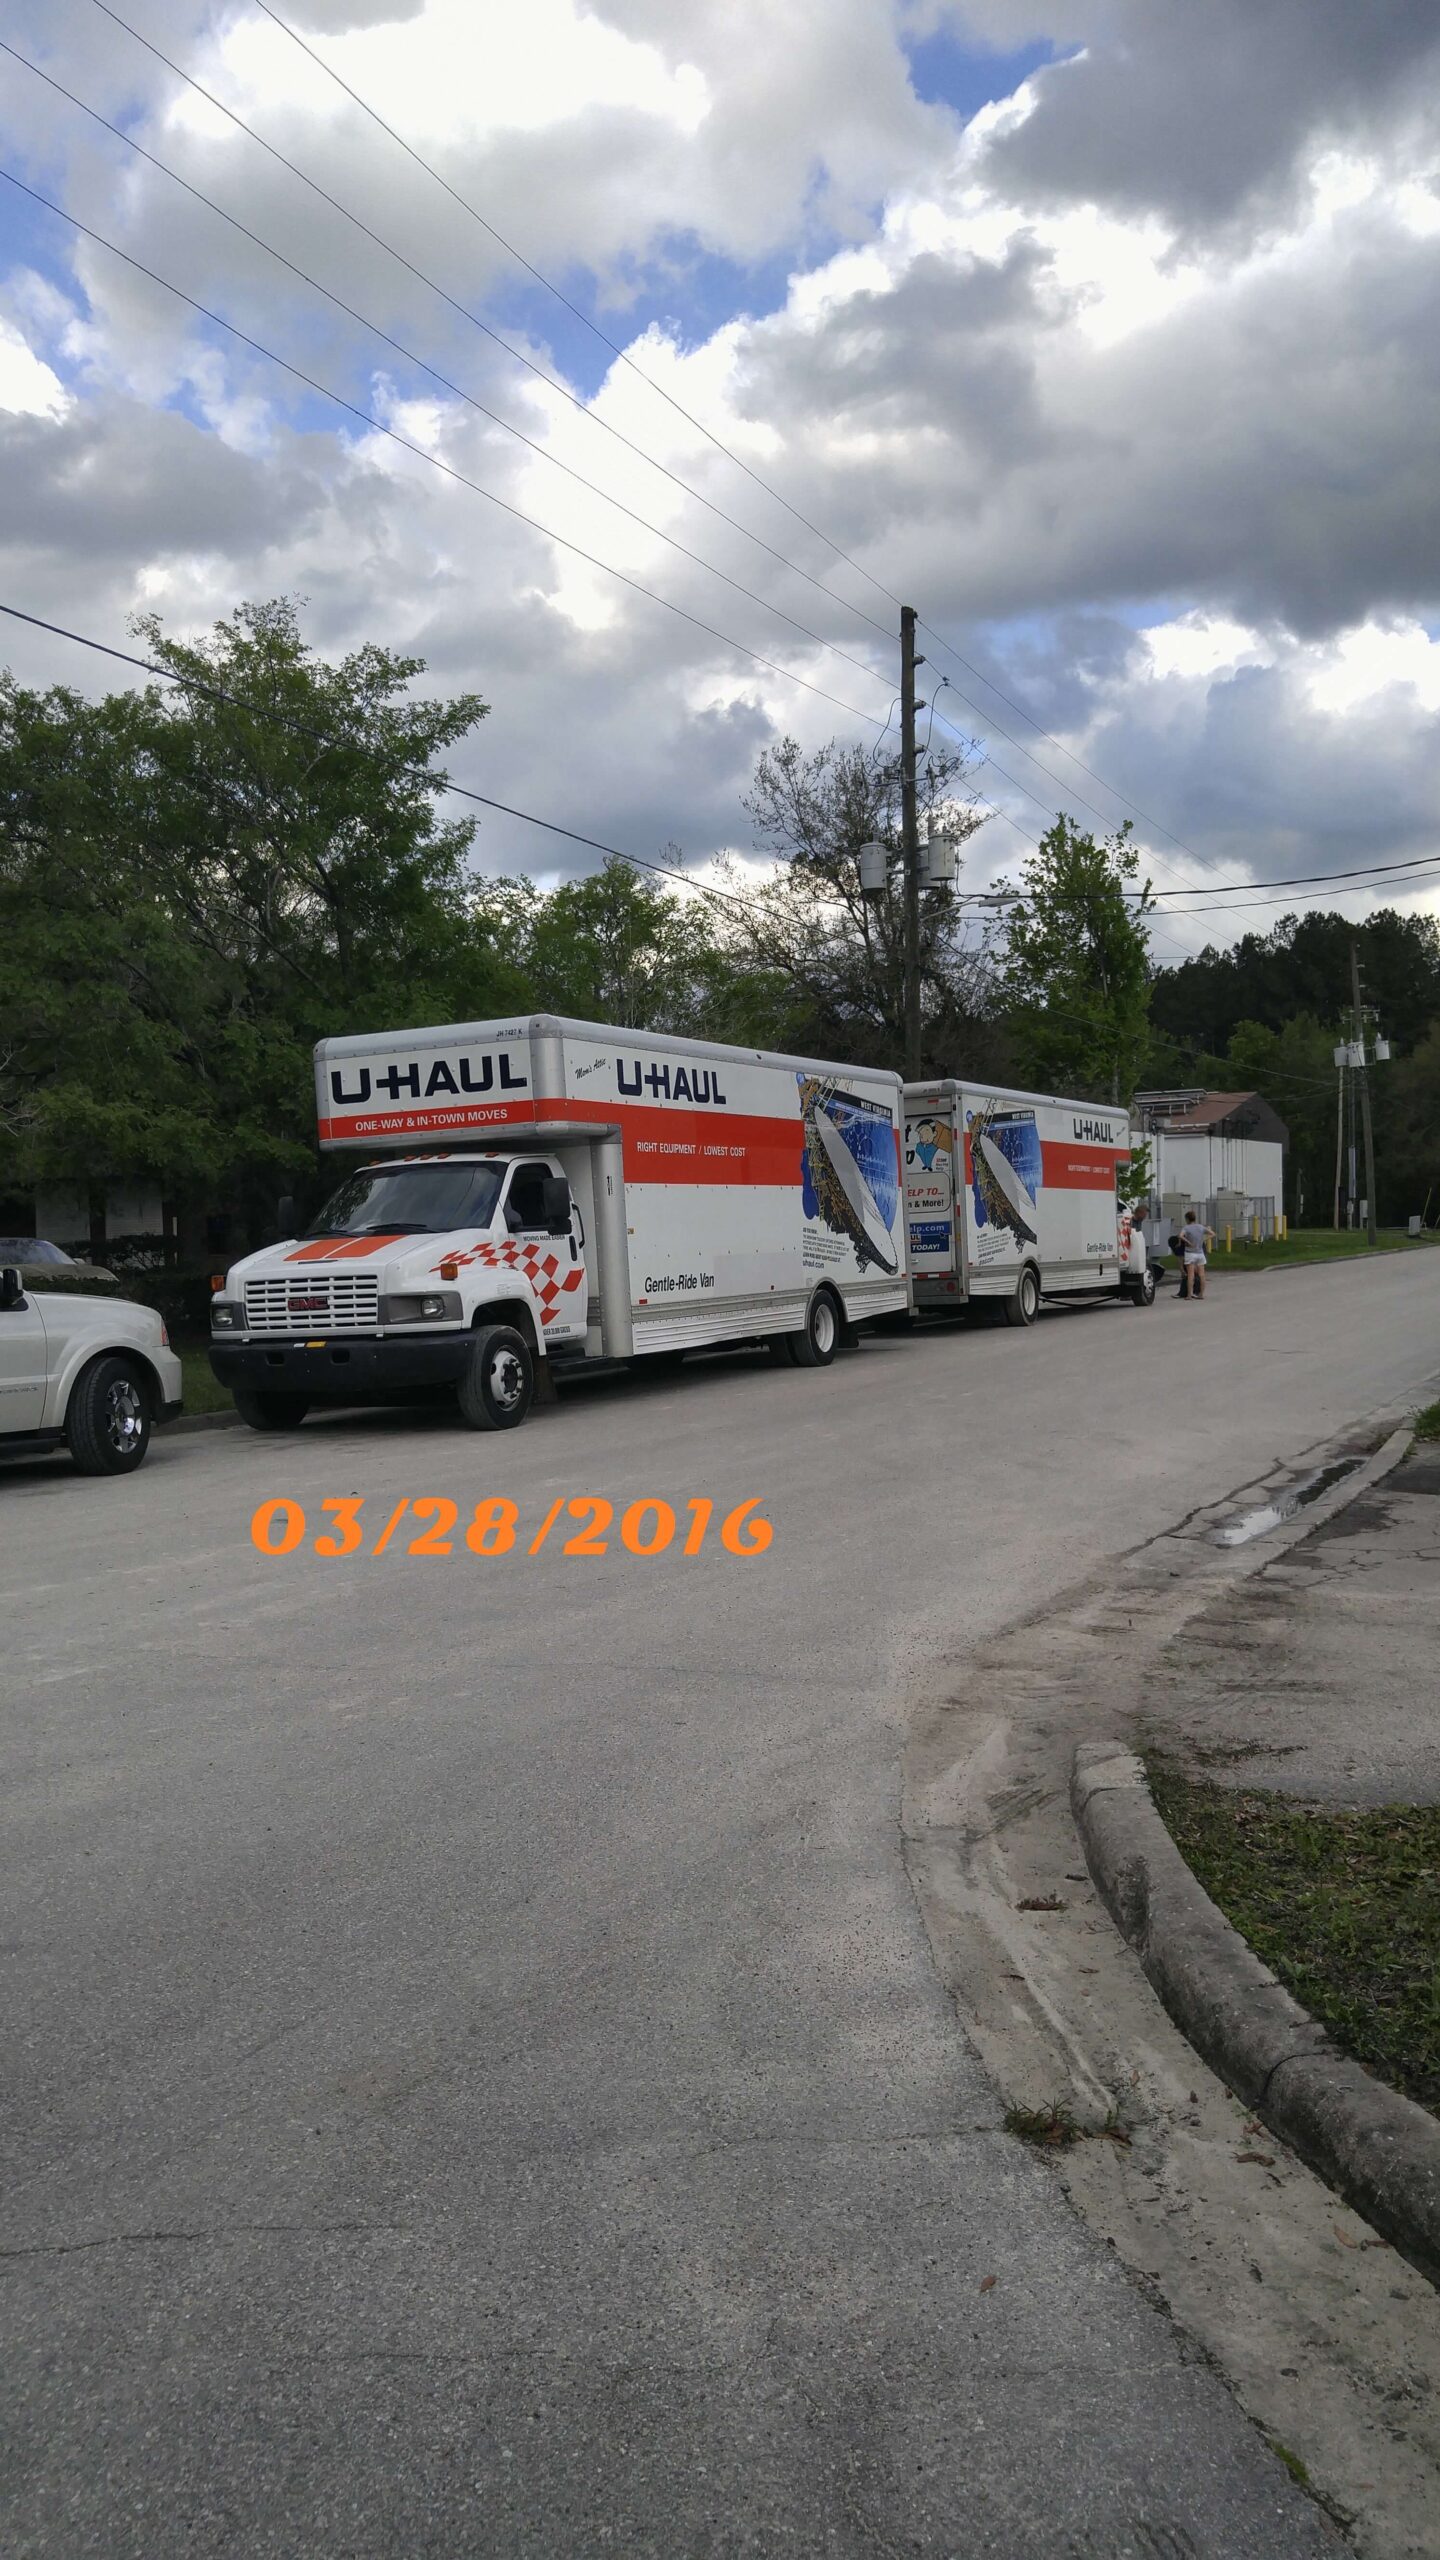 An image of U Haul trucks ready for long distance moving.